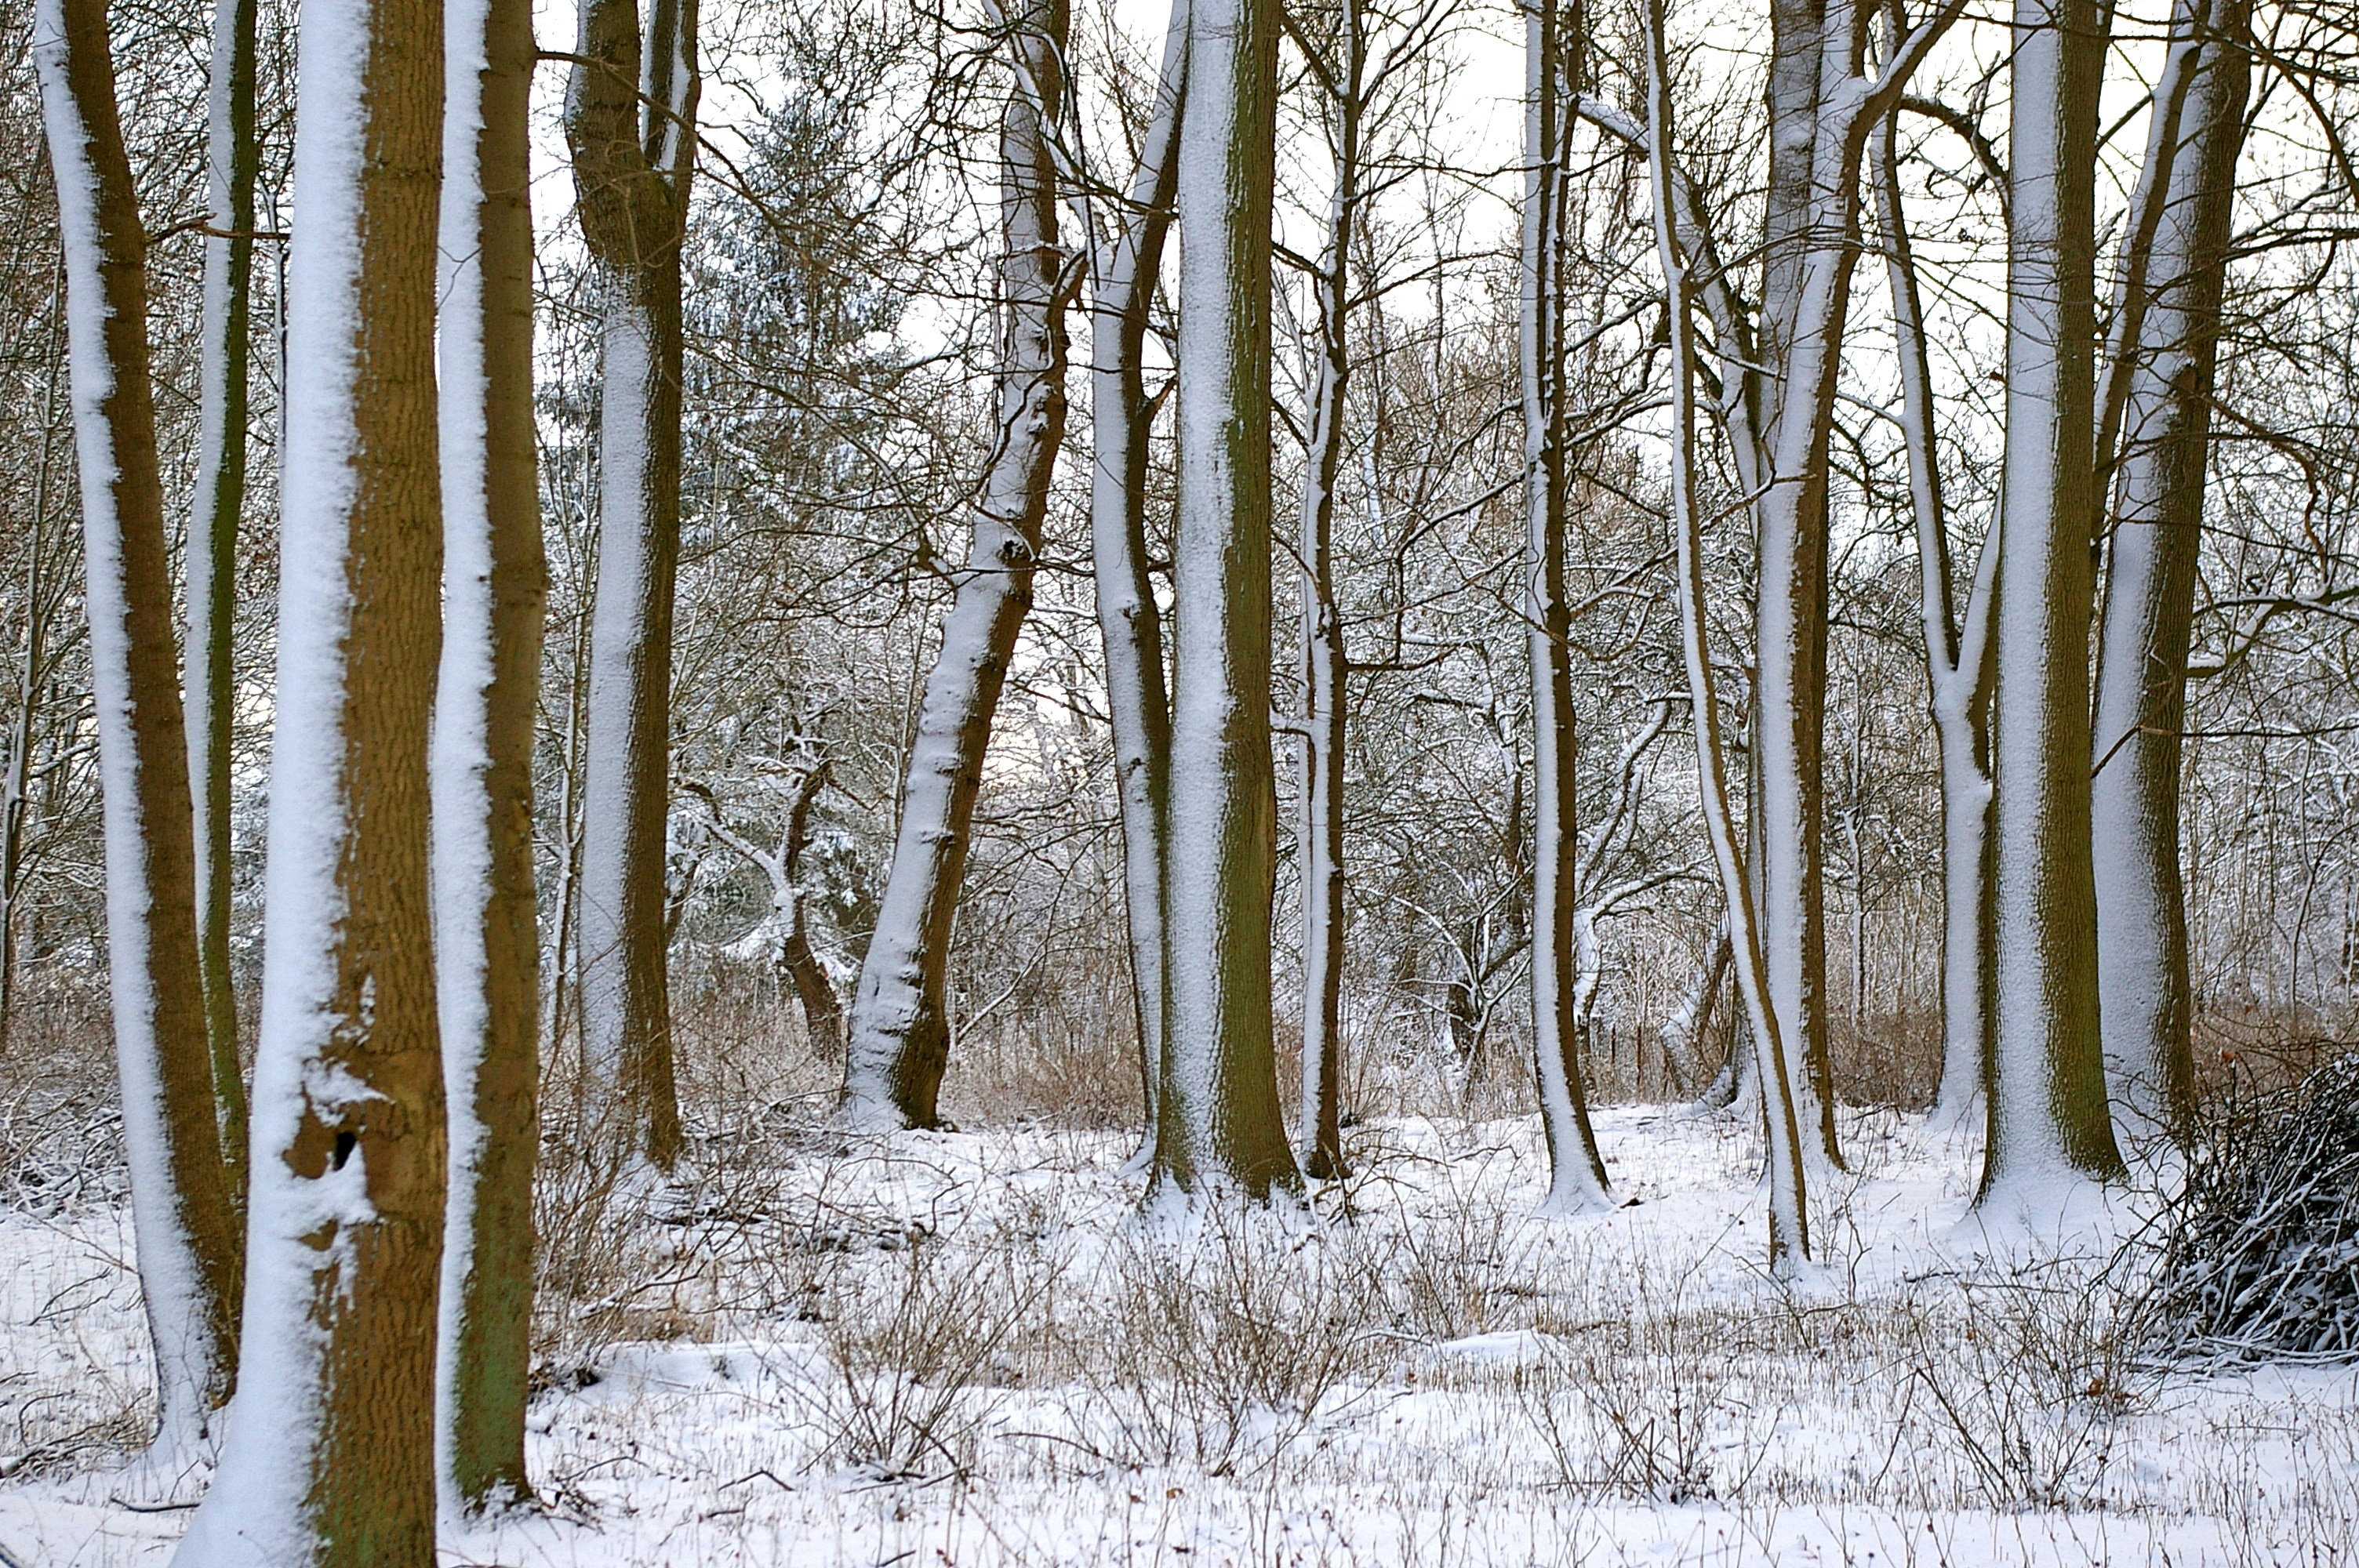 Forest, Wintry, Snow, Winter, Trees, snow, winter